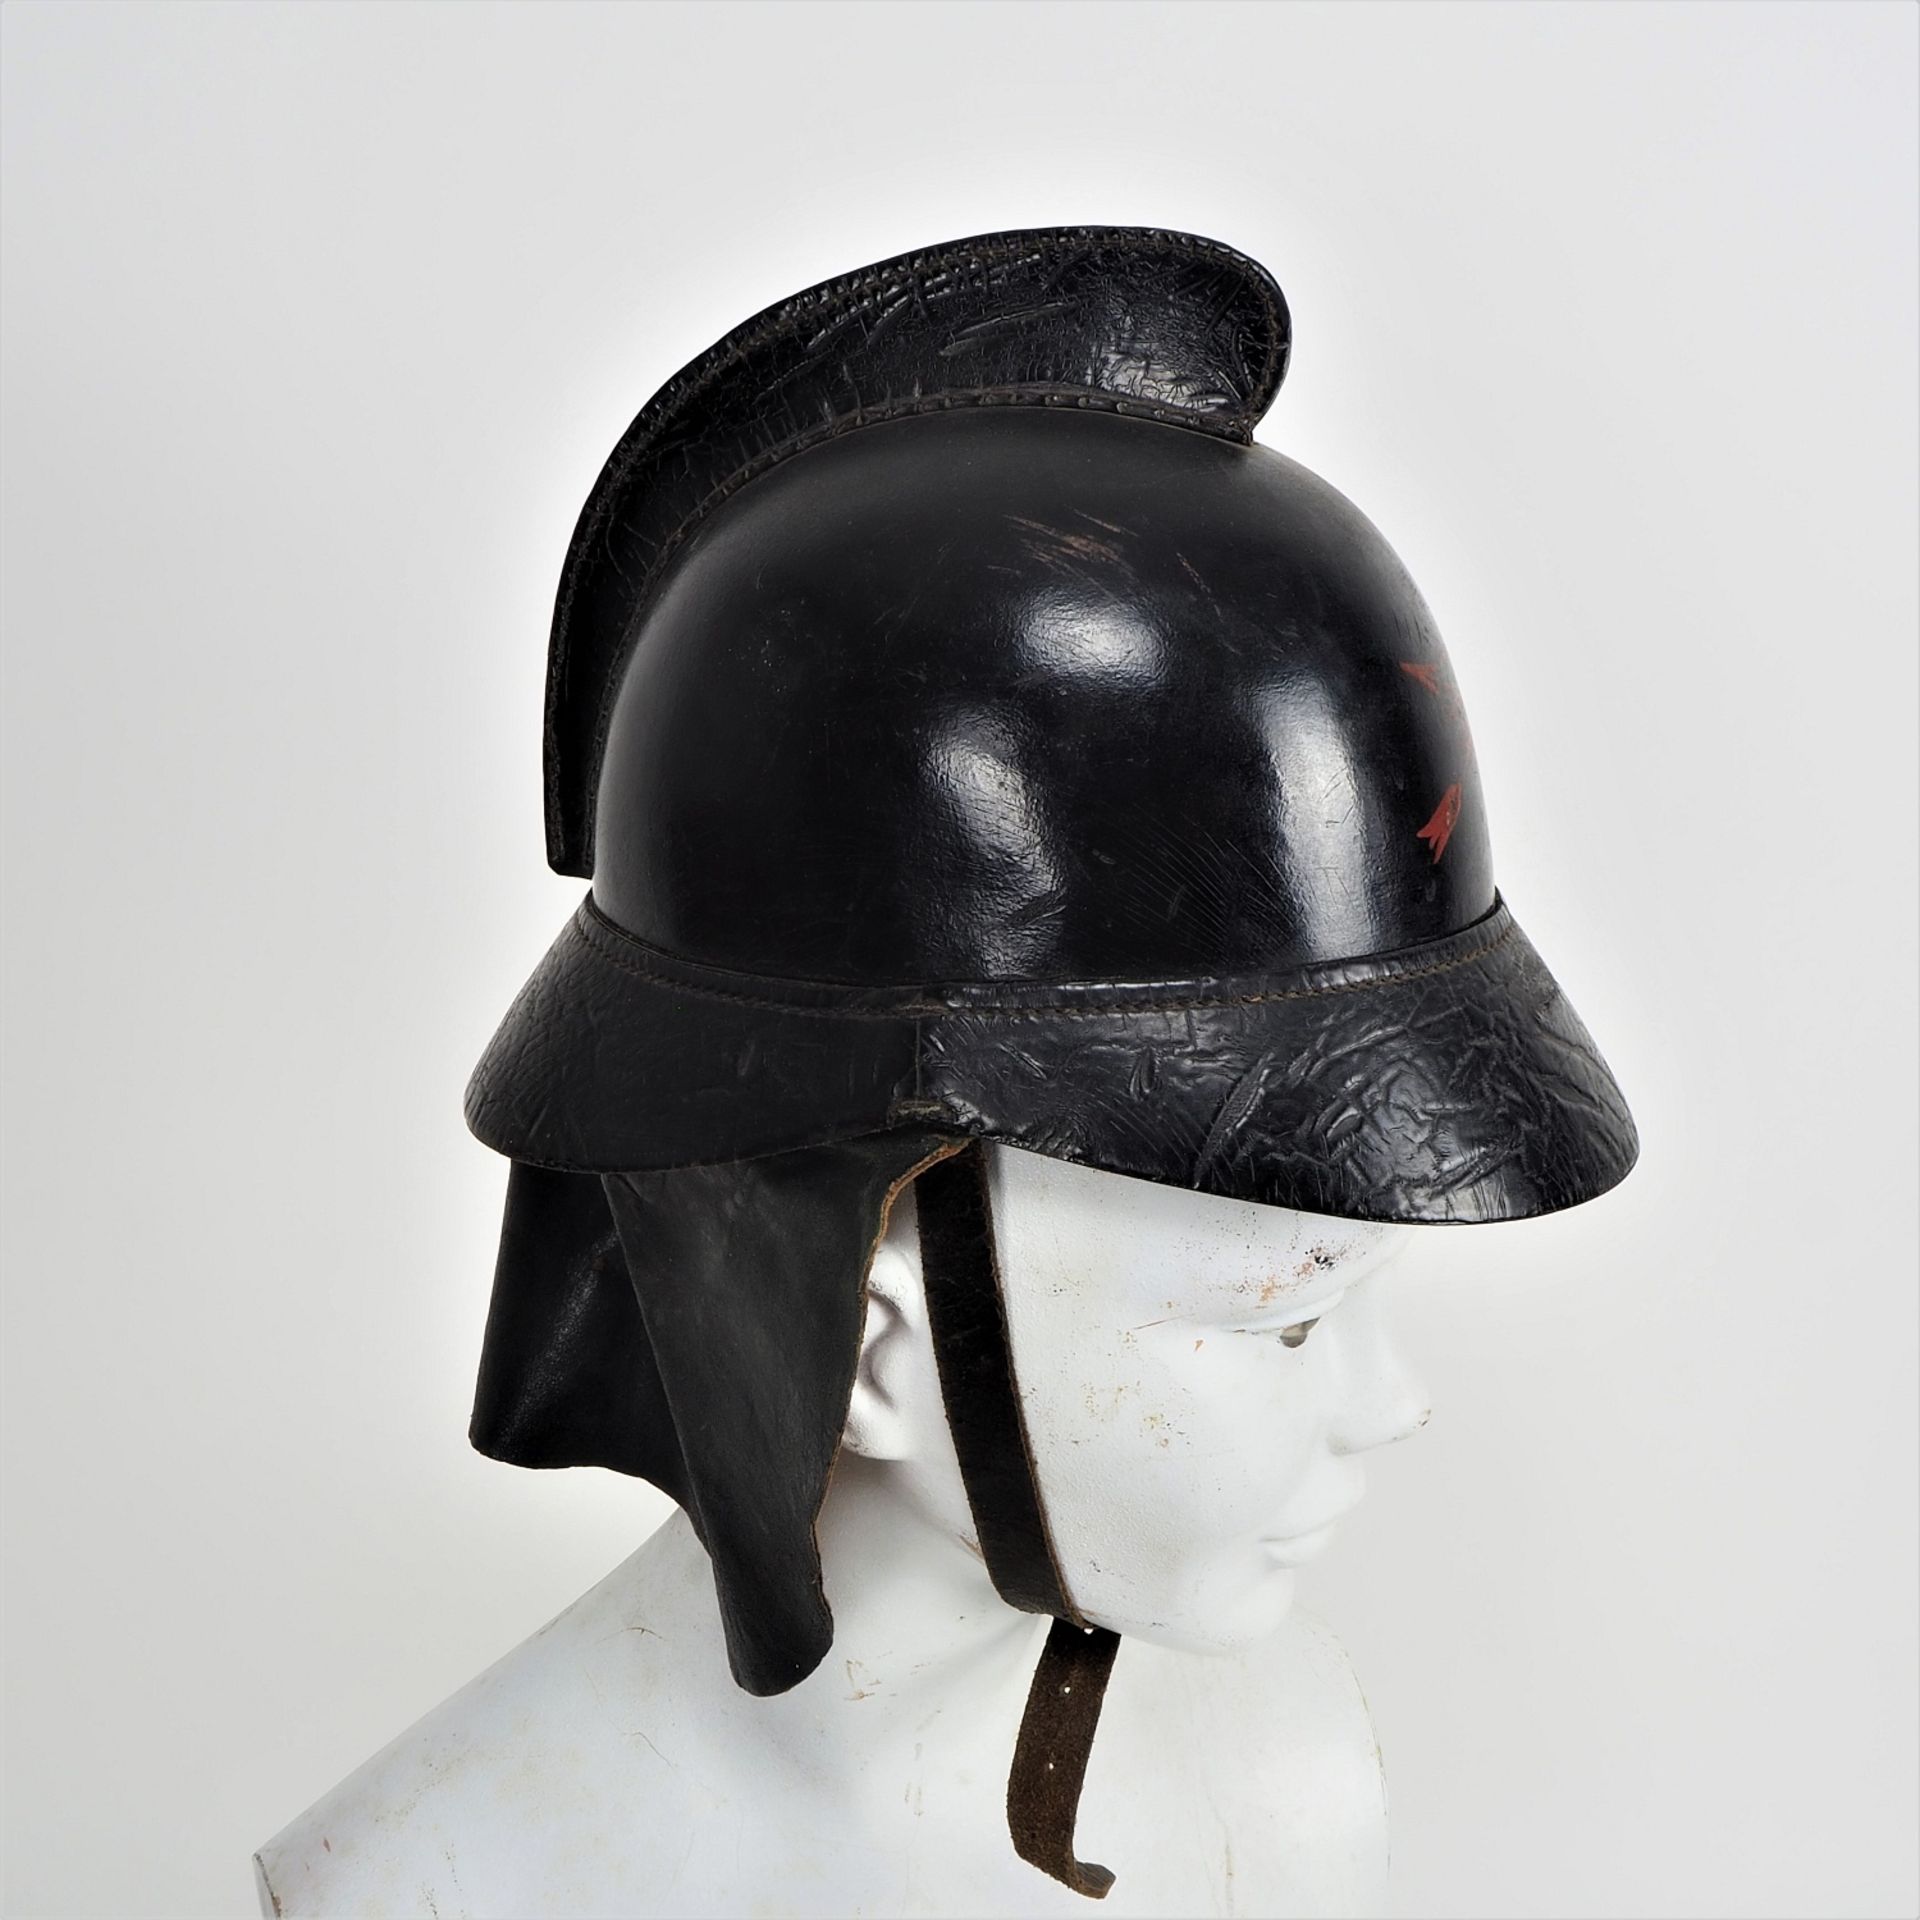 Leather fire helmet at 1900, probably South Germany (German Empire) - Image 2 of 4